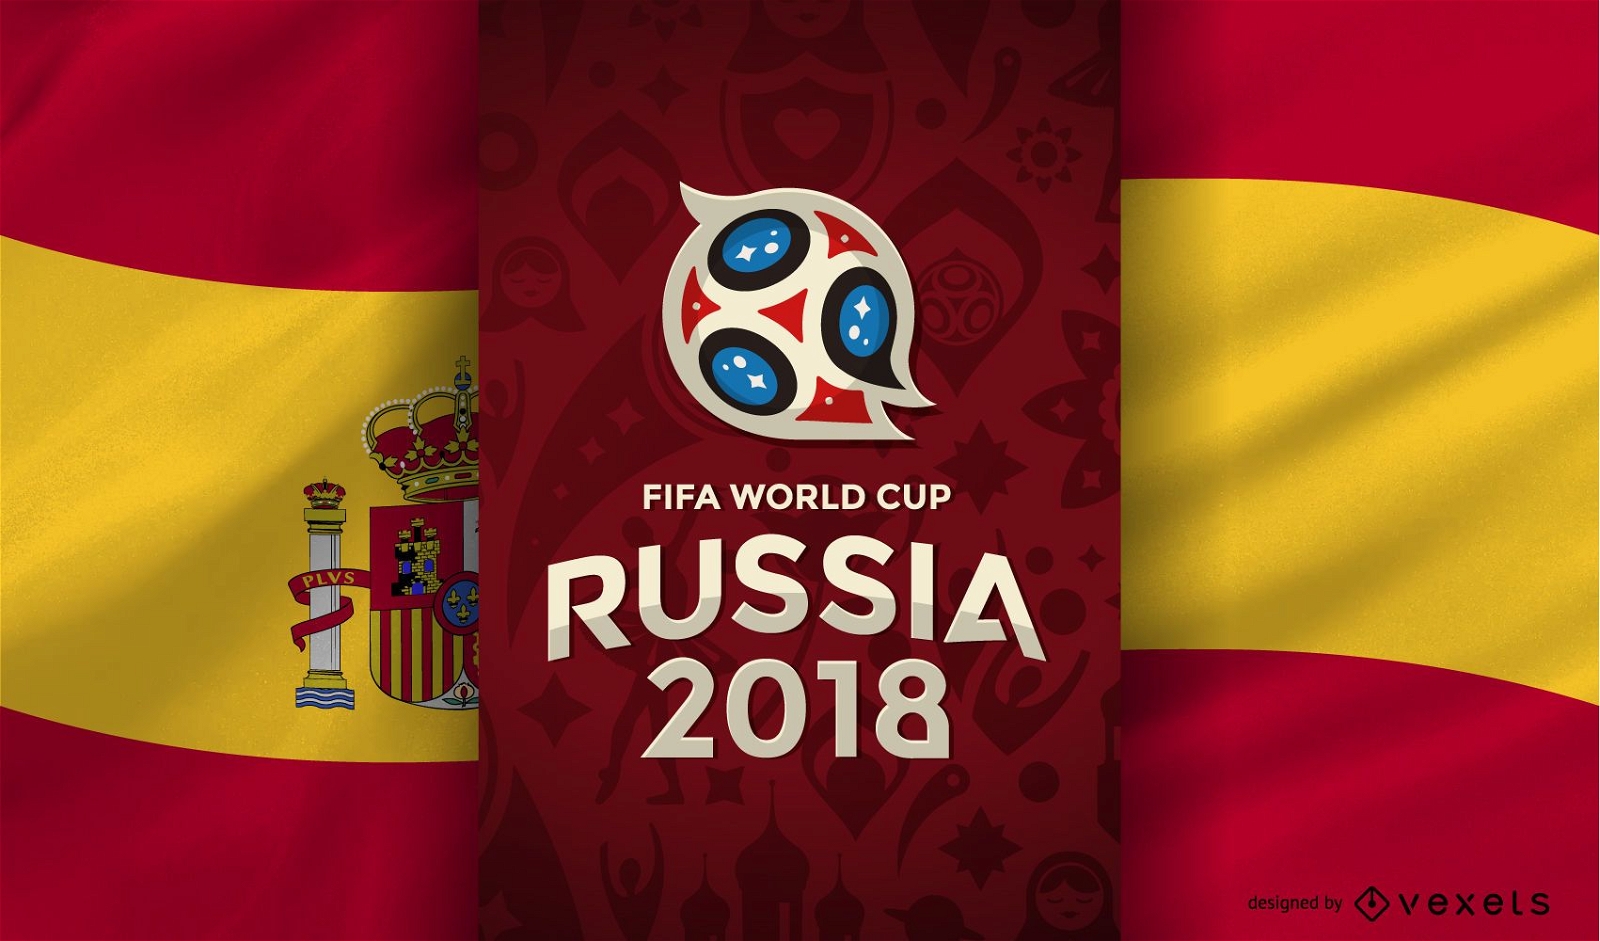 Russia 2018 World Cup with Spain flag